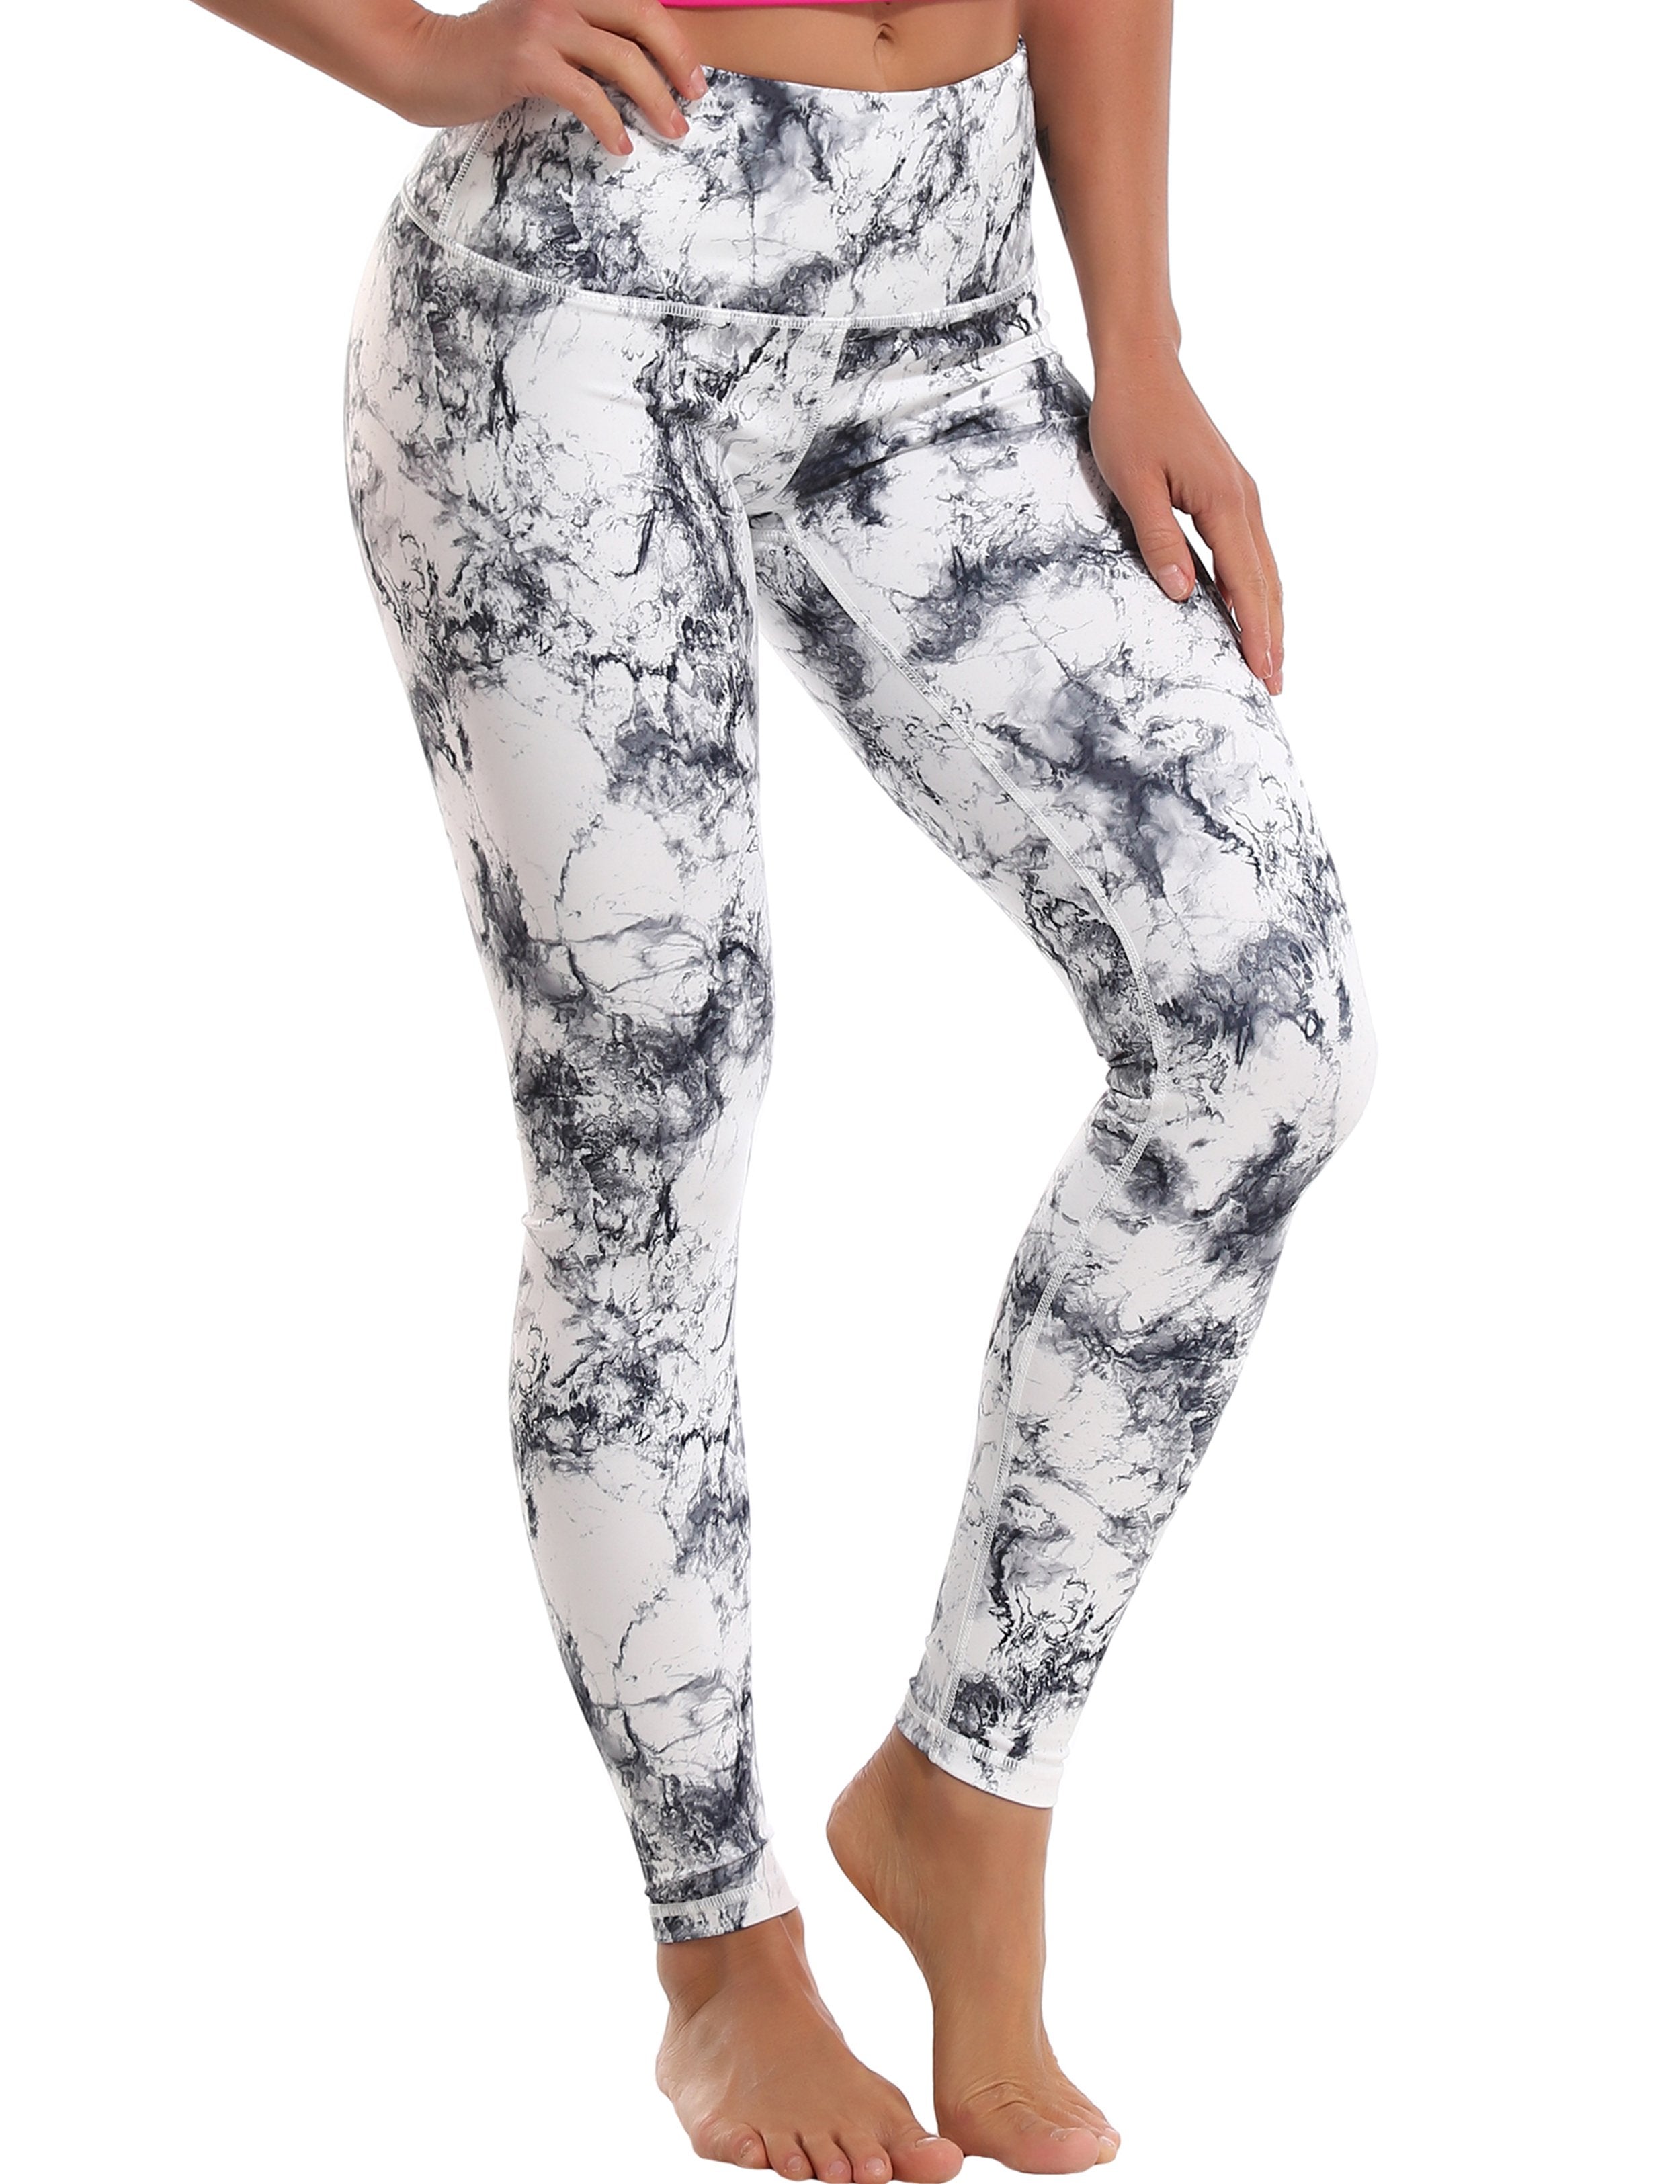 High Waist Golf Pants arabescato 82%Polyester/18%Spandex Fabric doesn't attract lint easily 4-way stretch No see-through Moisture-wicking Tummy control Inner pocket